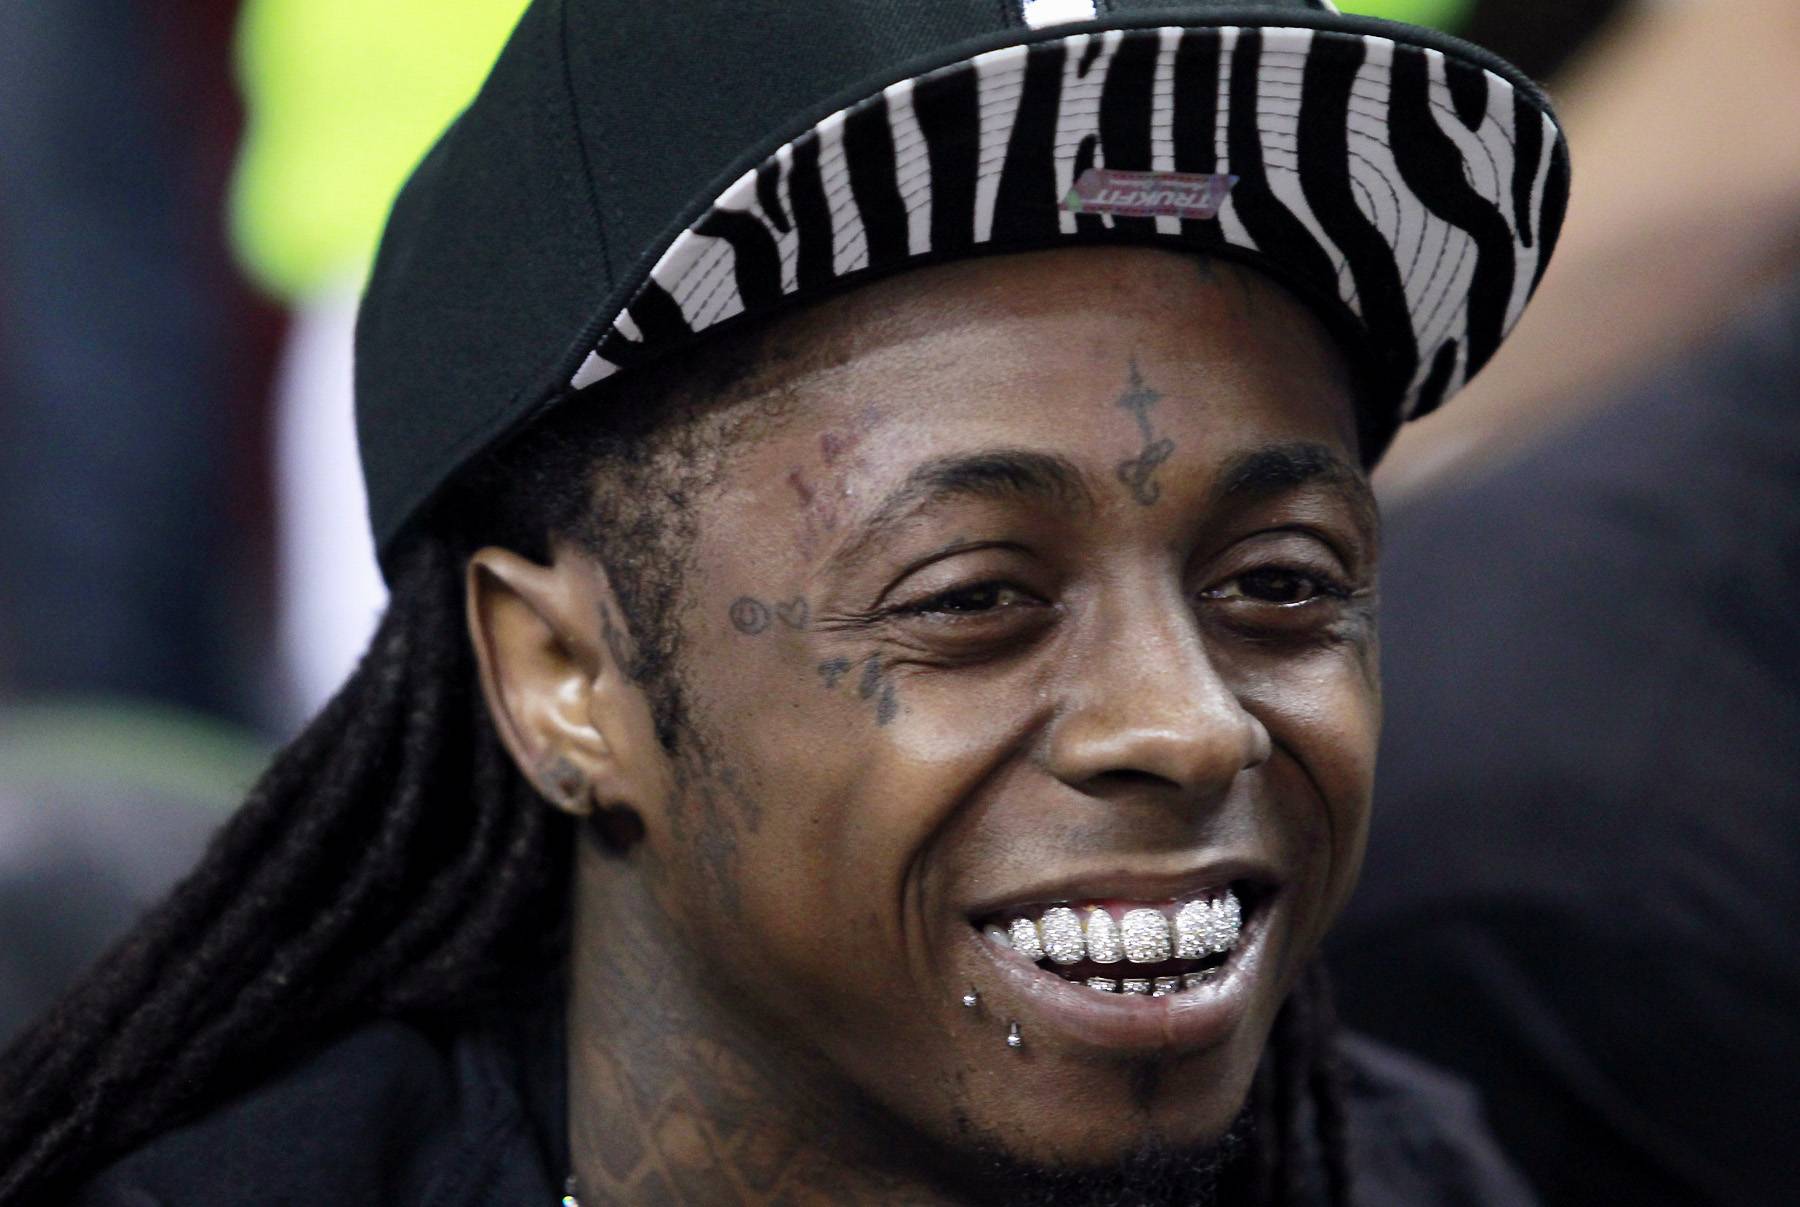 Lil’ Wayne after pulling his artists from the famed concert line-up:&nbsp; - &quot;Young Money ain't doing Summer Jam.&quot;&nbsp;(Photo: REUTERS/Andrew Innerarity)